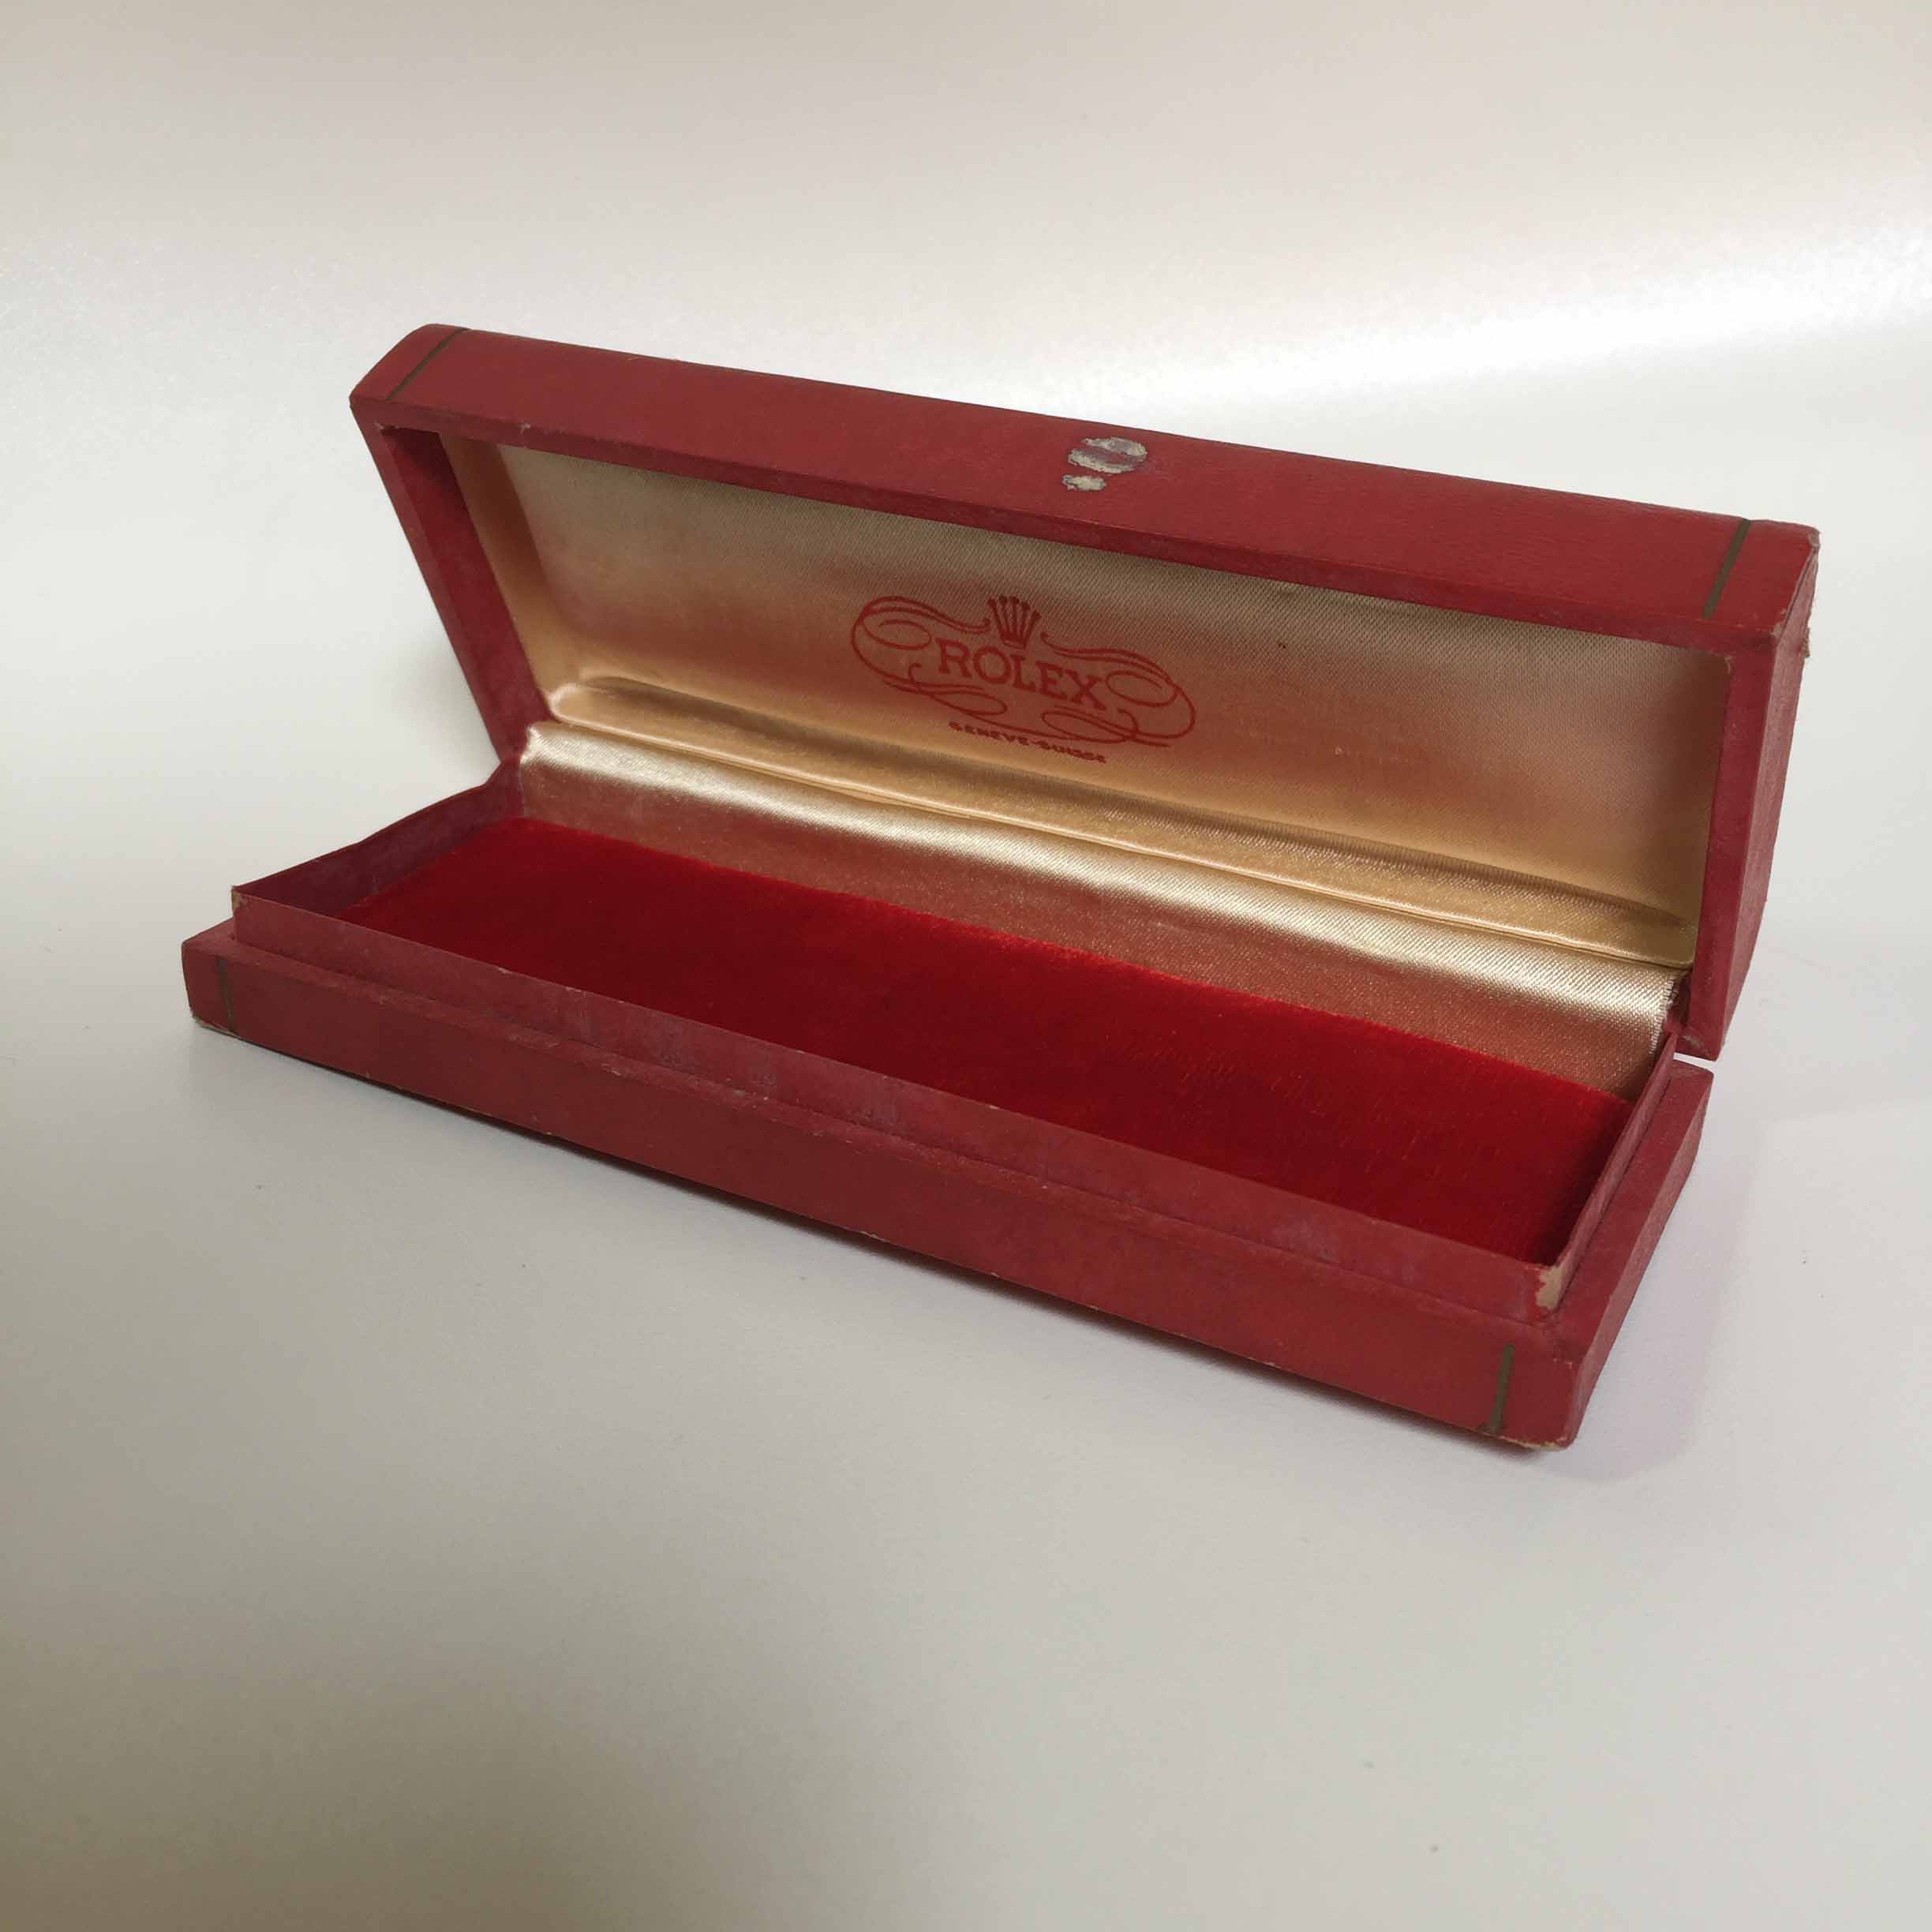 Vintage Watch Box | Watch Out